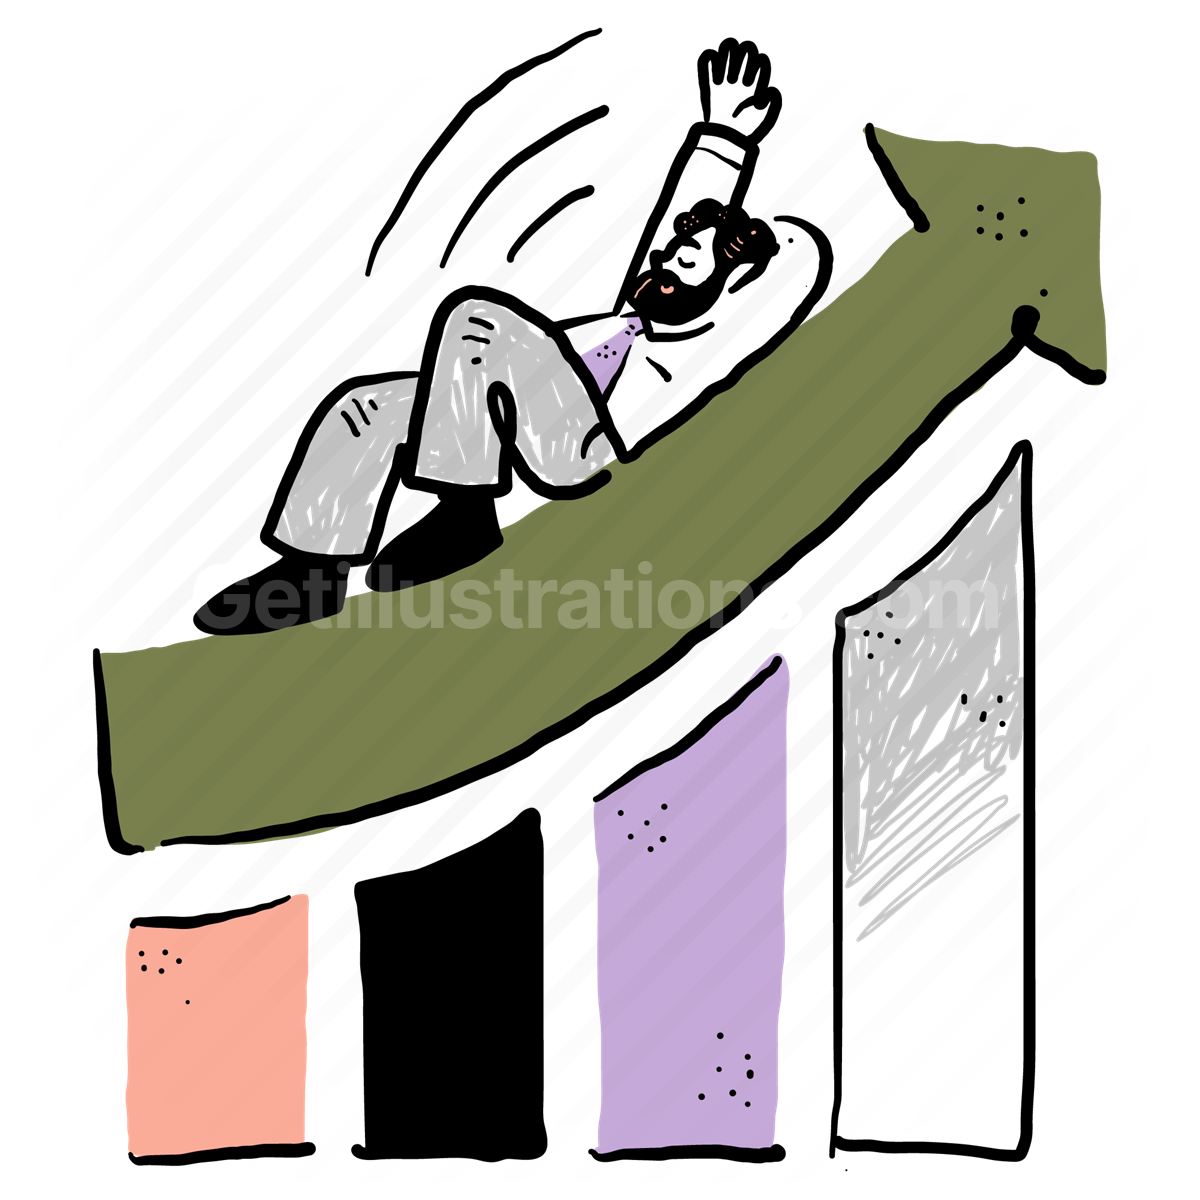 Business and Finance illustration